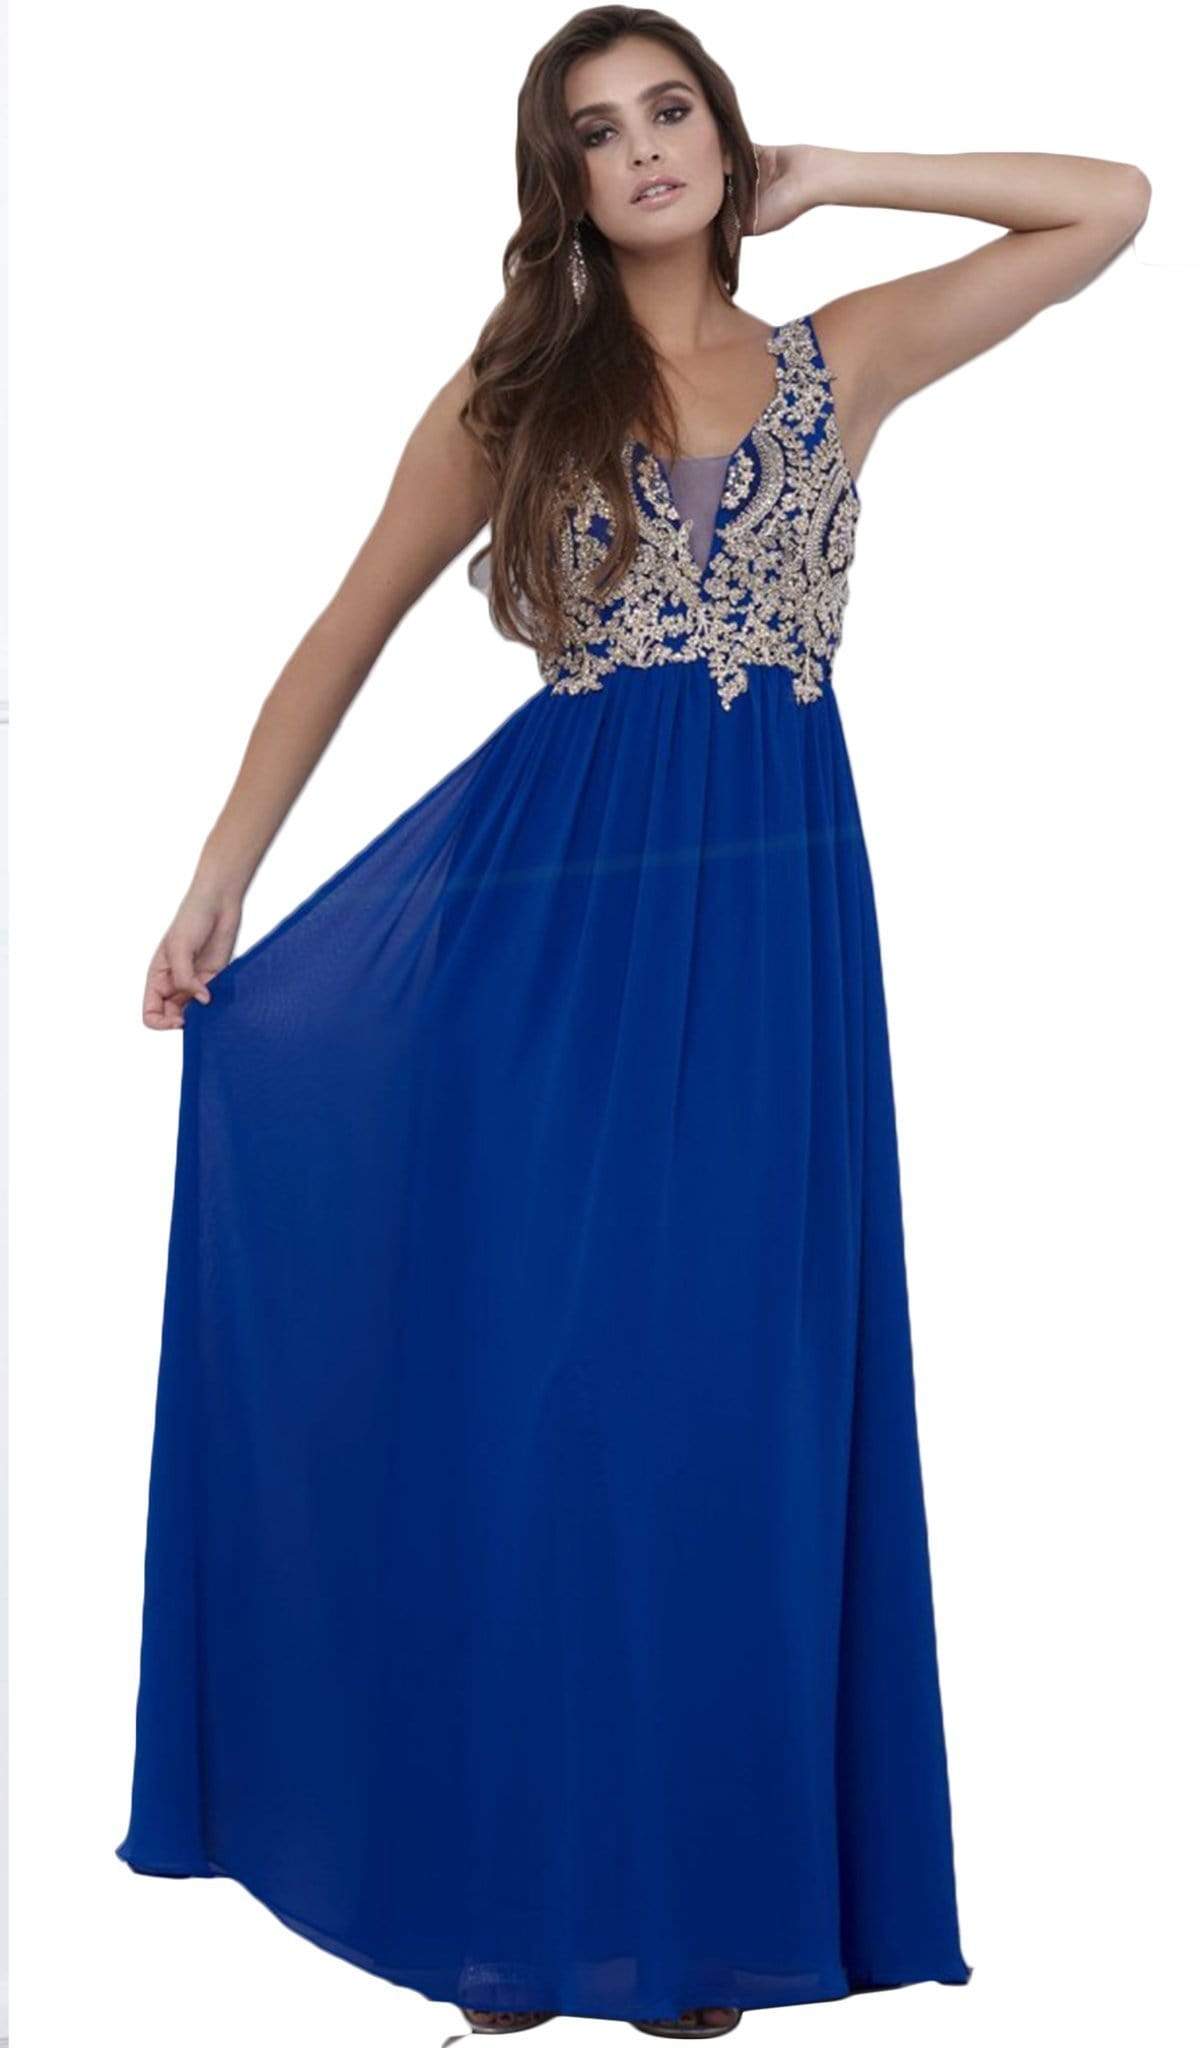 Nox Anabel - 8343 Sleeveless Beaded V Neck Lace Bodice Long Gown Special Occasion Dress